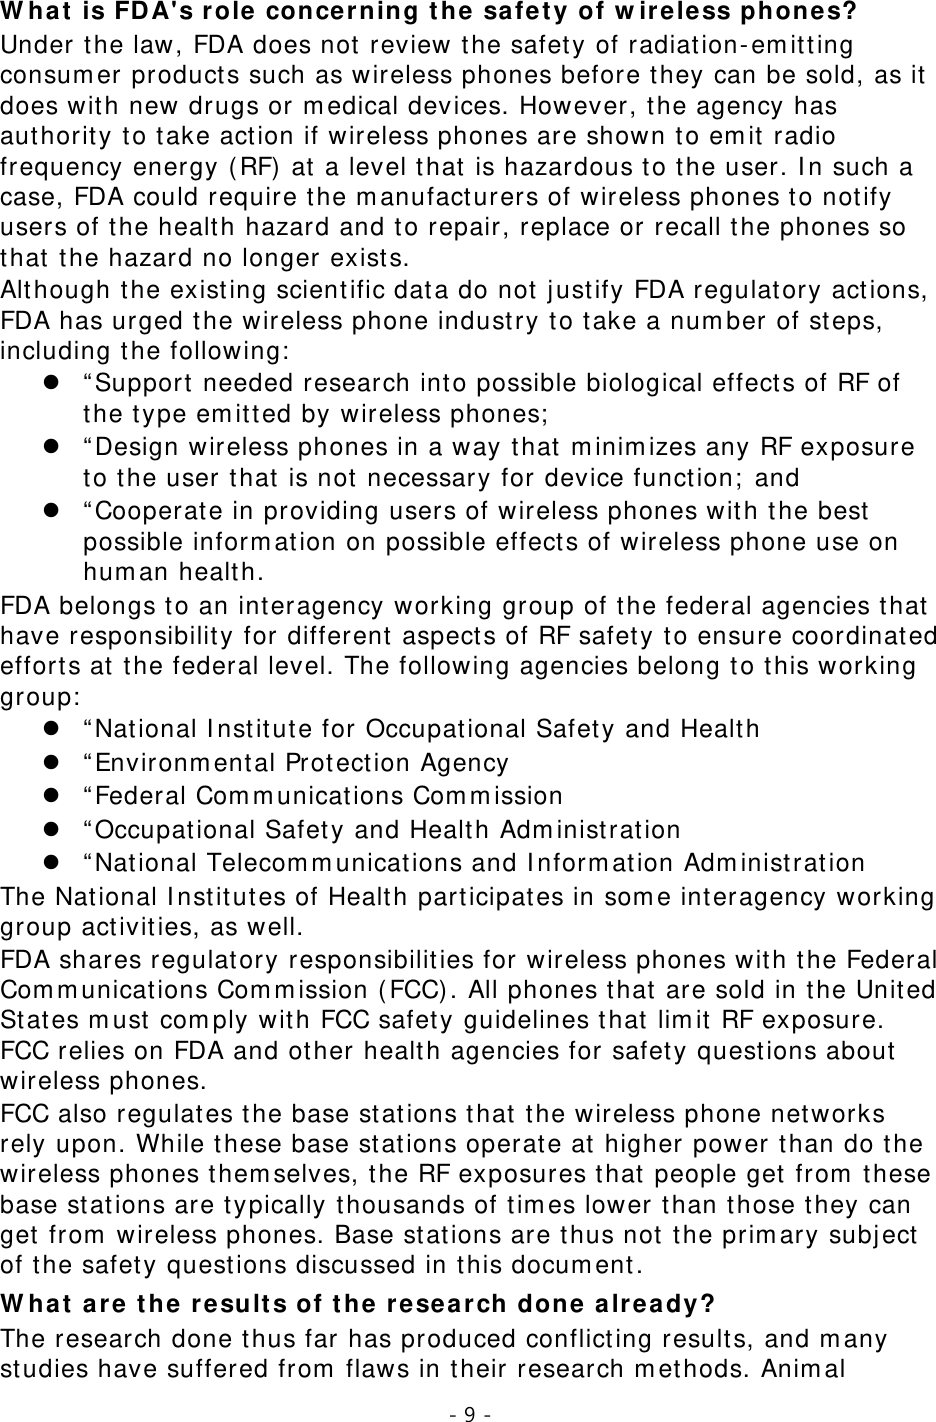 - 9 -  What is FDA&apos;s role concerning the safety of wireless phones? Under the law, FDA does not review the safety of radiation-emitting consumer products such as wireless phones before they can be sold, as it does with new drugs or medical devices. However, the agency has authority to take action if wireless phones are shown to emit radio frequency energy (RF) at a level that is hazardous to the user. In such a case, FDA could require the manufacturers of wireless phones to notify users of the health hazard and to repair, replace or recall the phones so that the hazard no longer exists. Although the existing scientific data do not justify FDA regulatory actions, FDA has urged the wireless phone industry to take a number of steps, including the following:  “Support needed research into possible biological effects of RF of the type emitted by wireless phones;  “Design wireless phones in a way that minimizes any RF exposure to the user that is not necessary for device function; and  “Cooperate in providing users of wireless phones with the best possible information on possible effects of wireless phone use on human health. FDA belongs to an interagency working group of the federal agencies that have responsibility for different aspects of RF safety to ensure coordinated efforts at the federal level. The following agencies belong to this working group:  “National Institute for Occupational Safety and Health  “Environmental Protection Agency  “Federal Communications Commission  “Occupational Safety and Health Administration  “National Telecommunications and Information Administration The National Institutes of Health participates in some interagency working group activities, as well. FDA shares regulatory responsibilities for wireless phones with the Federal Communications Commission (FCC). All phones that are sold in the United States must comply with FCC safety guidelines that limit RF exposure. FCC relies on FDA and other health agencies for safety questions about wireless phones. FCC also regulates the base stations that the wireless phone networks rely upon. While these base stations operate at higher power than do the wireless phones themselves, the RF exposures that people get from these base stations are typically thousands of times lower than those they can get from wireless phones. Base stations are thus not the primary subject of the safety questions discussed in this document. What are the results of the research done already? The research done thus far has produced conflicting results, and many studies have suffered from flaws in their research methods. Animal 